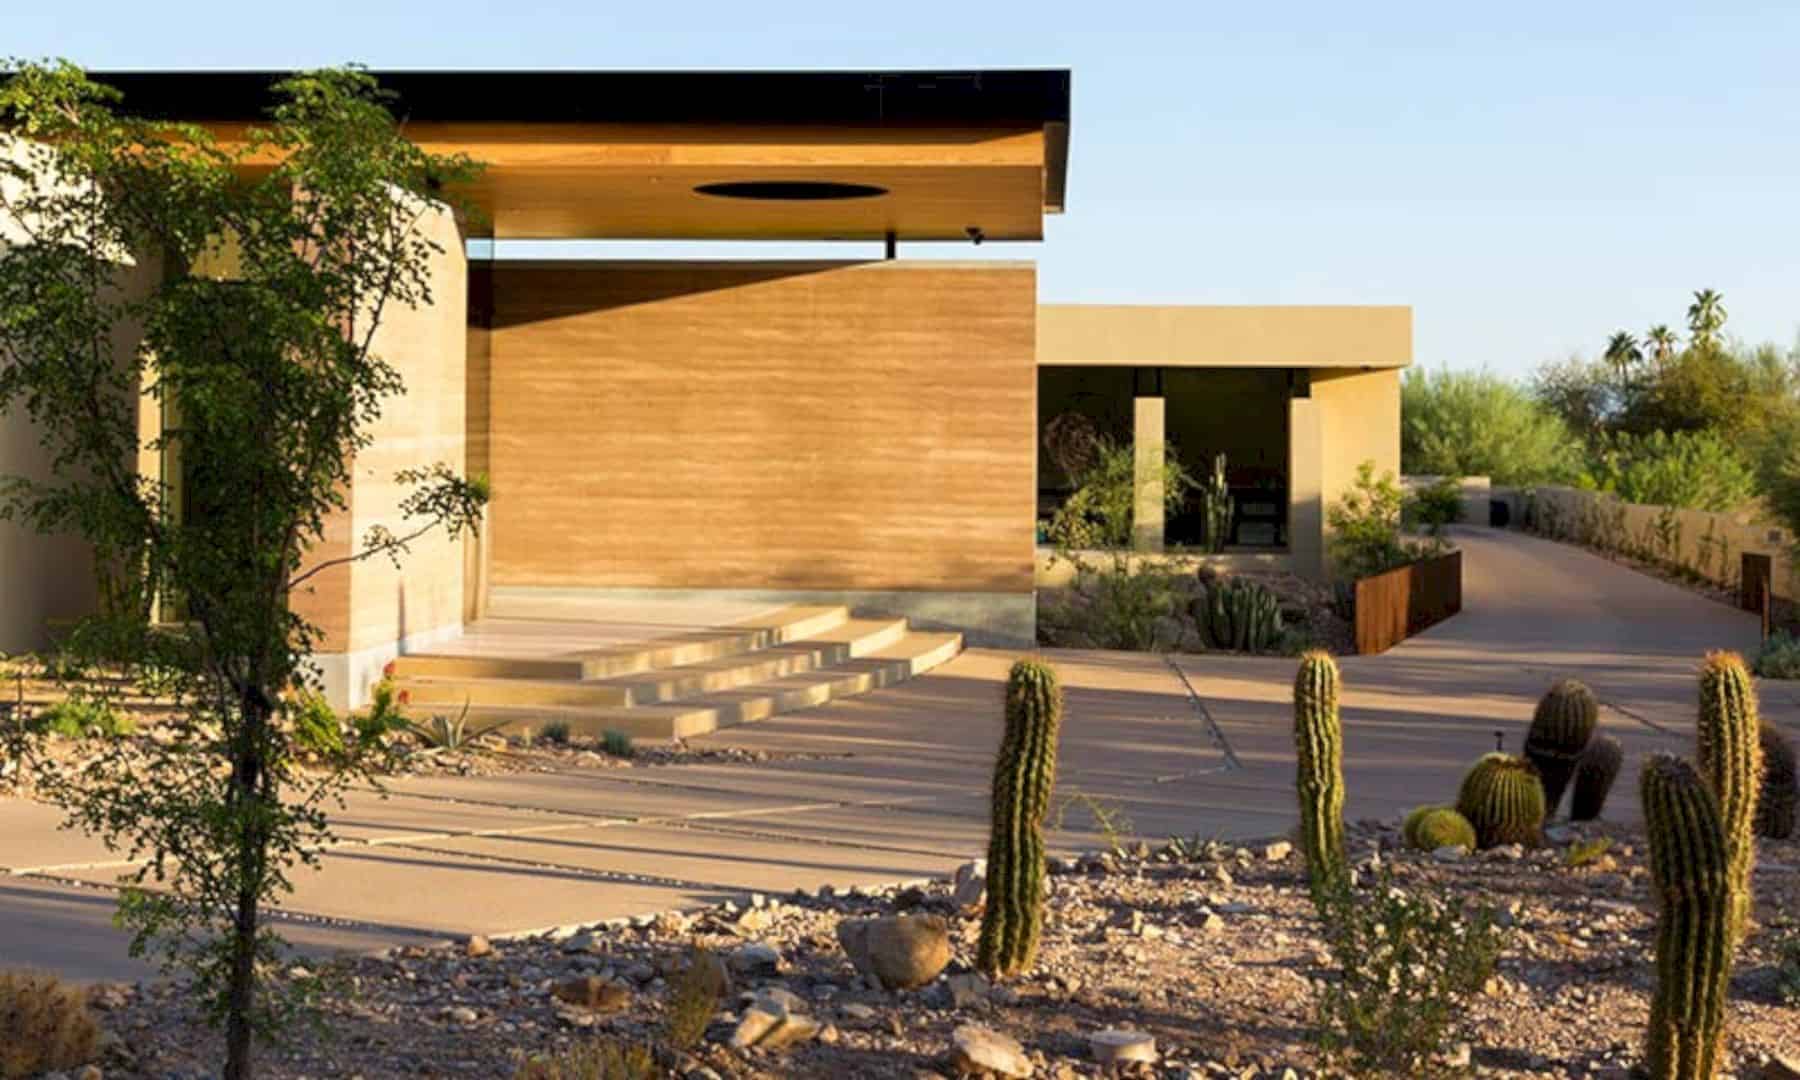 Desert Wash Residence A Modern Desert Home Defining Paradise Valleys Topographical Feature 3